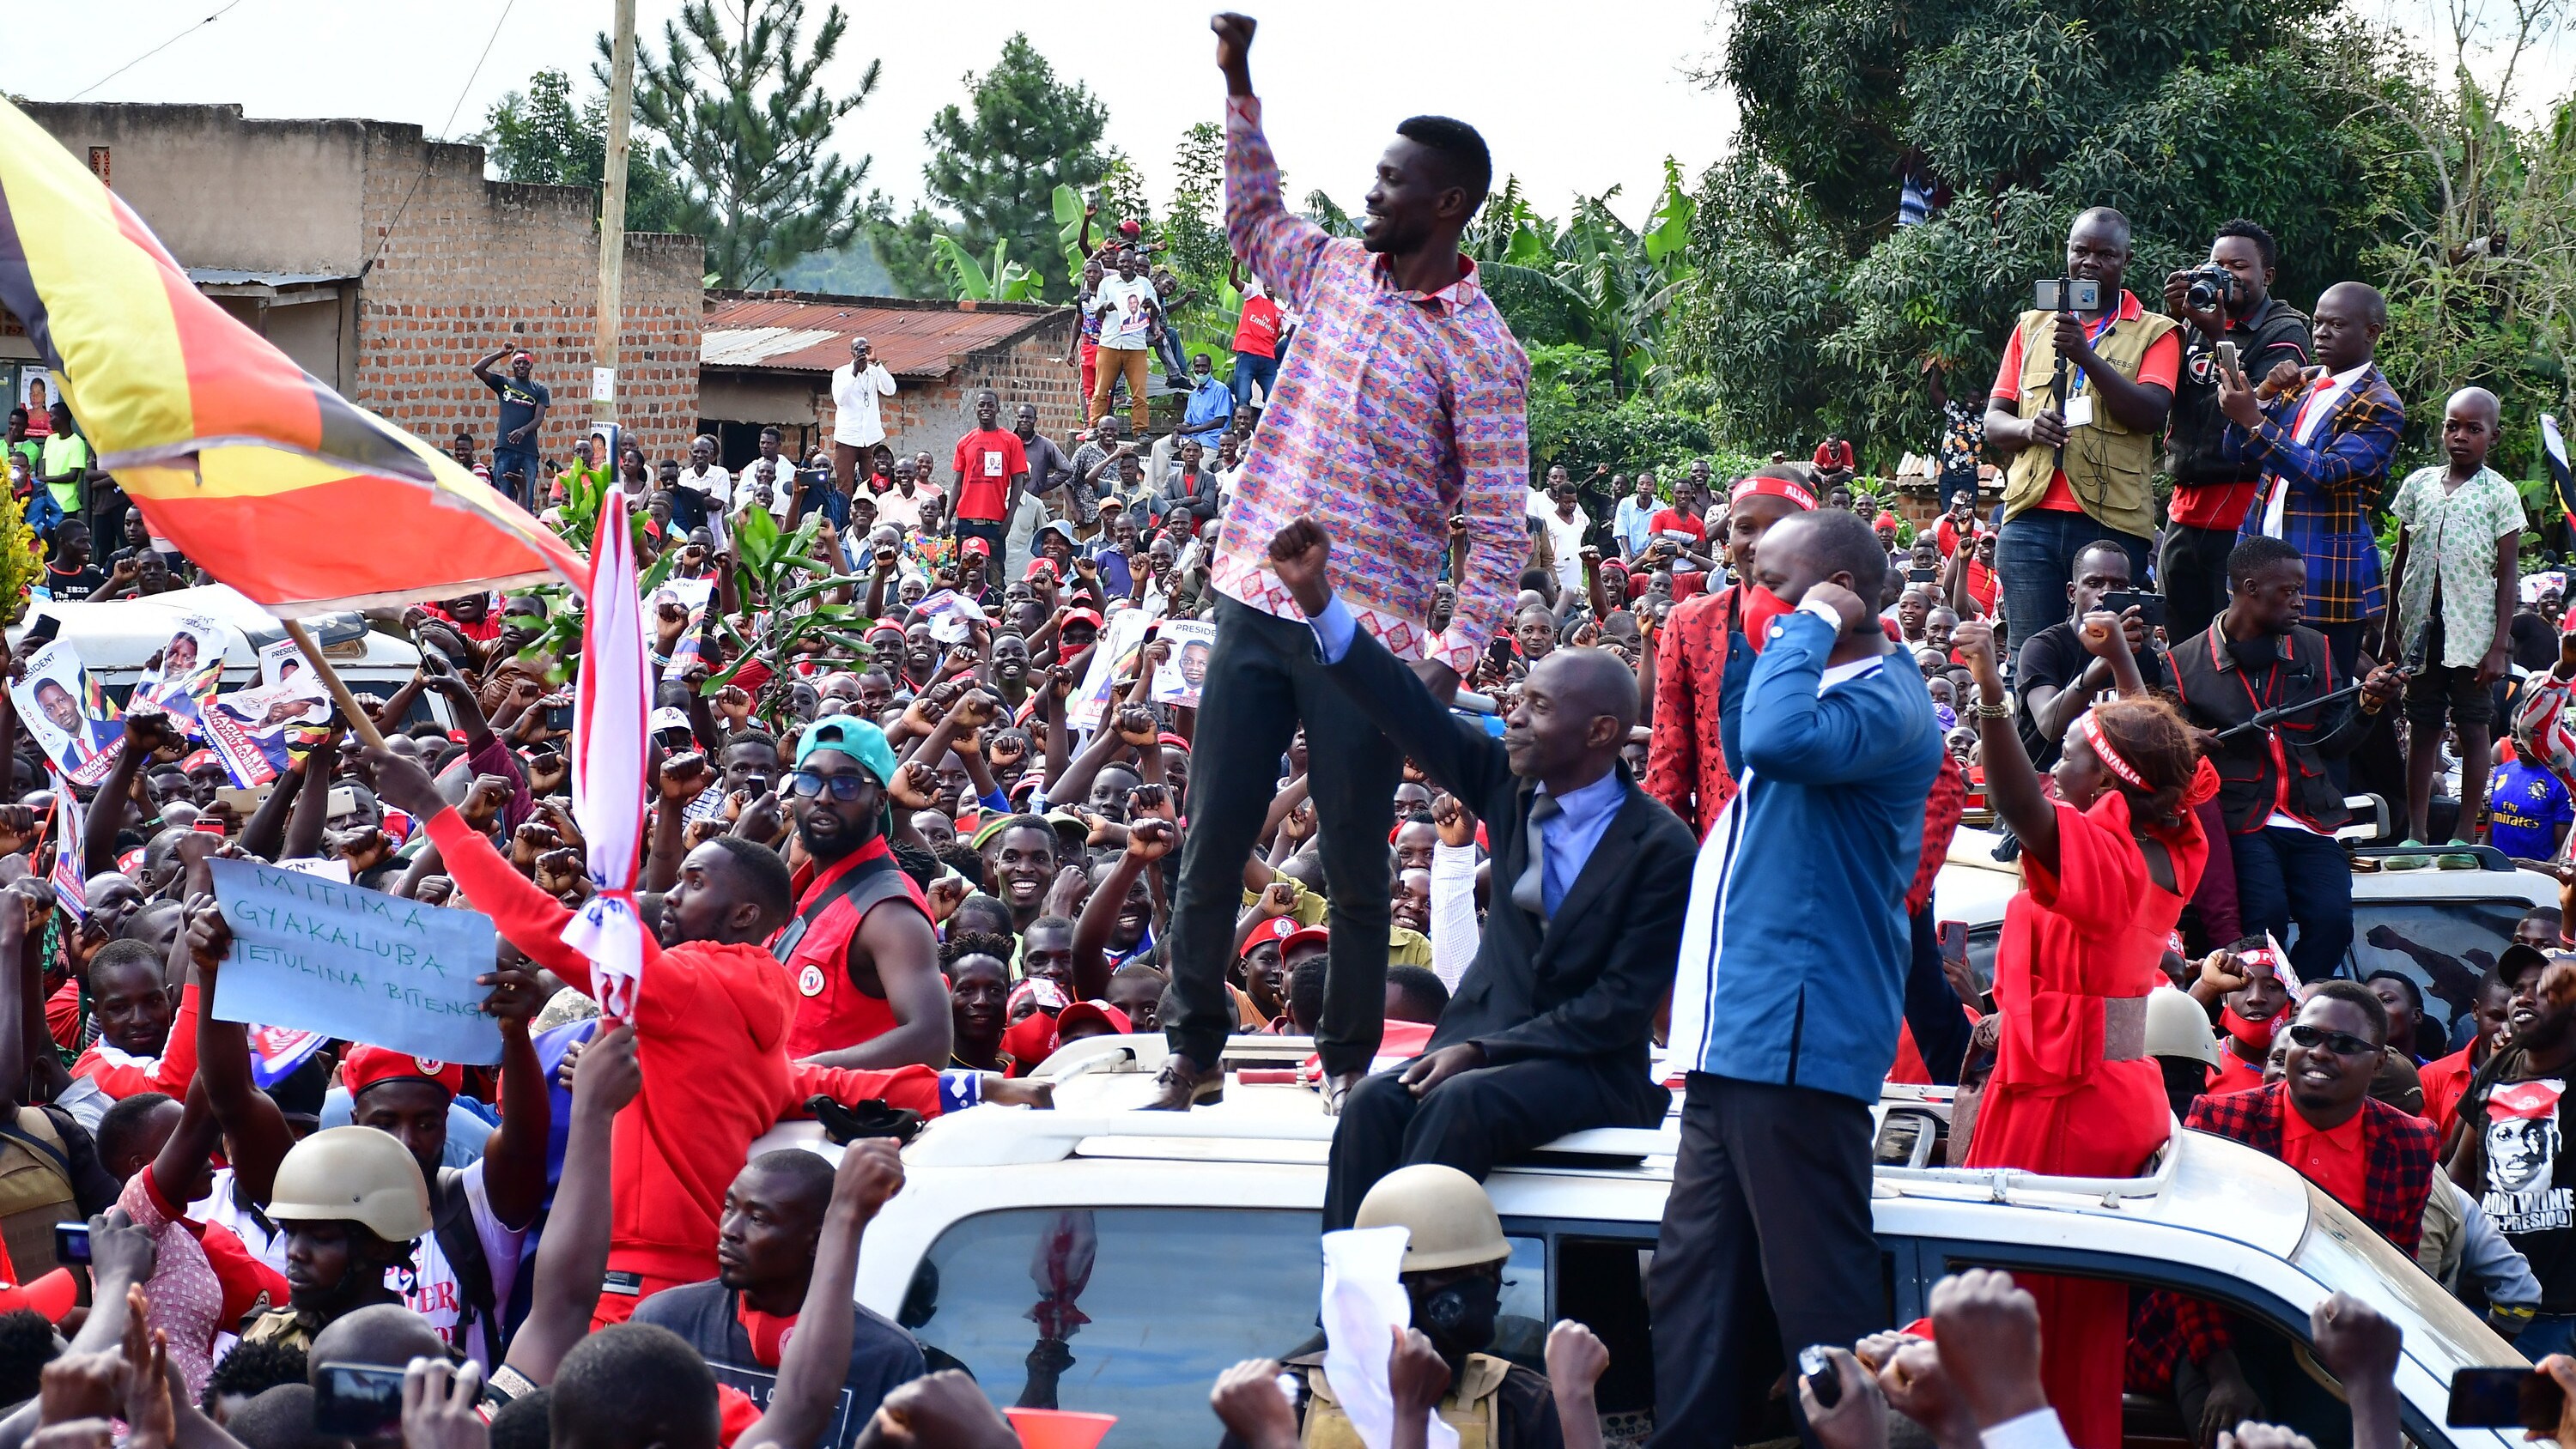 Bobi Wine on top of his vehicle during the 2021 presidential campaigns as he solicited for support in Nakaseke, Central Uganda on November 18, 2020. (photo credit: Lookman Kampala)